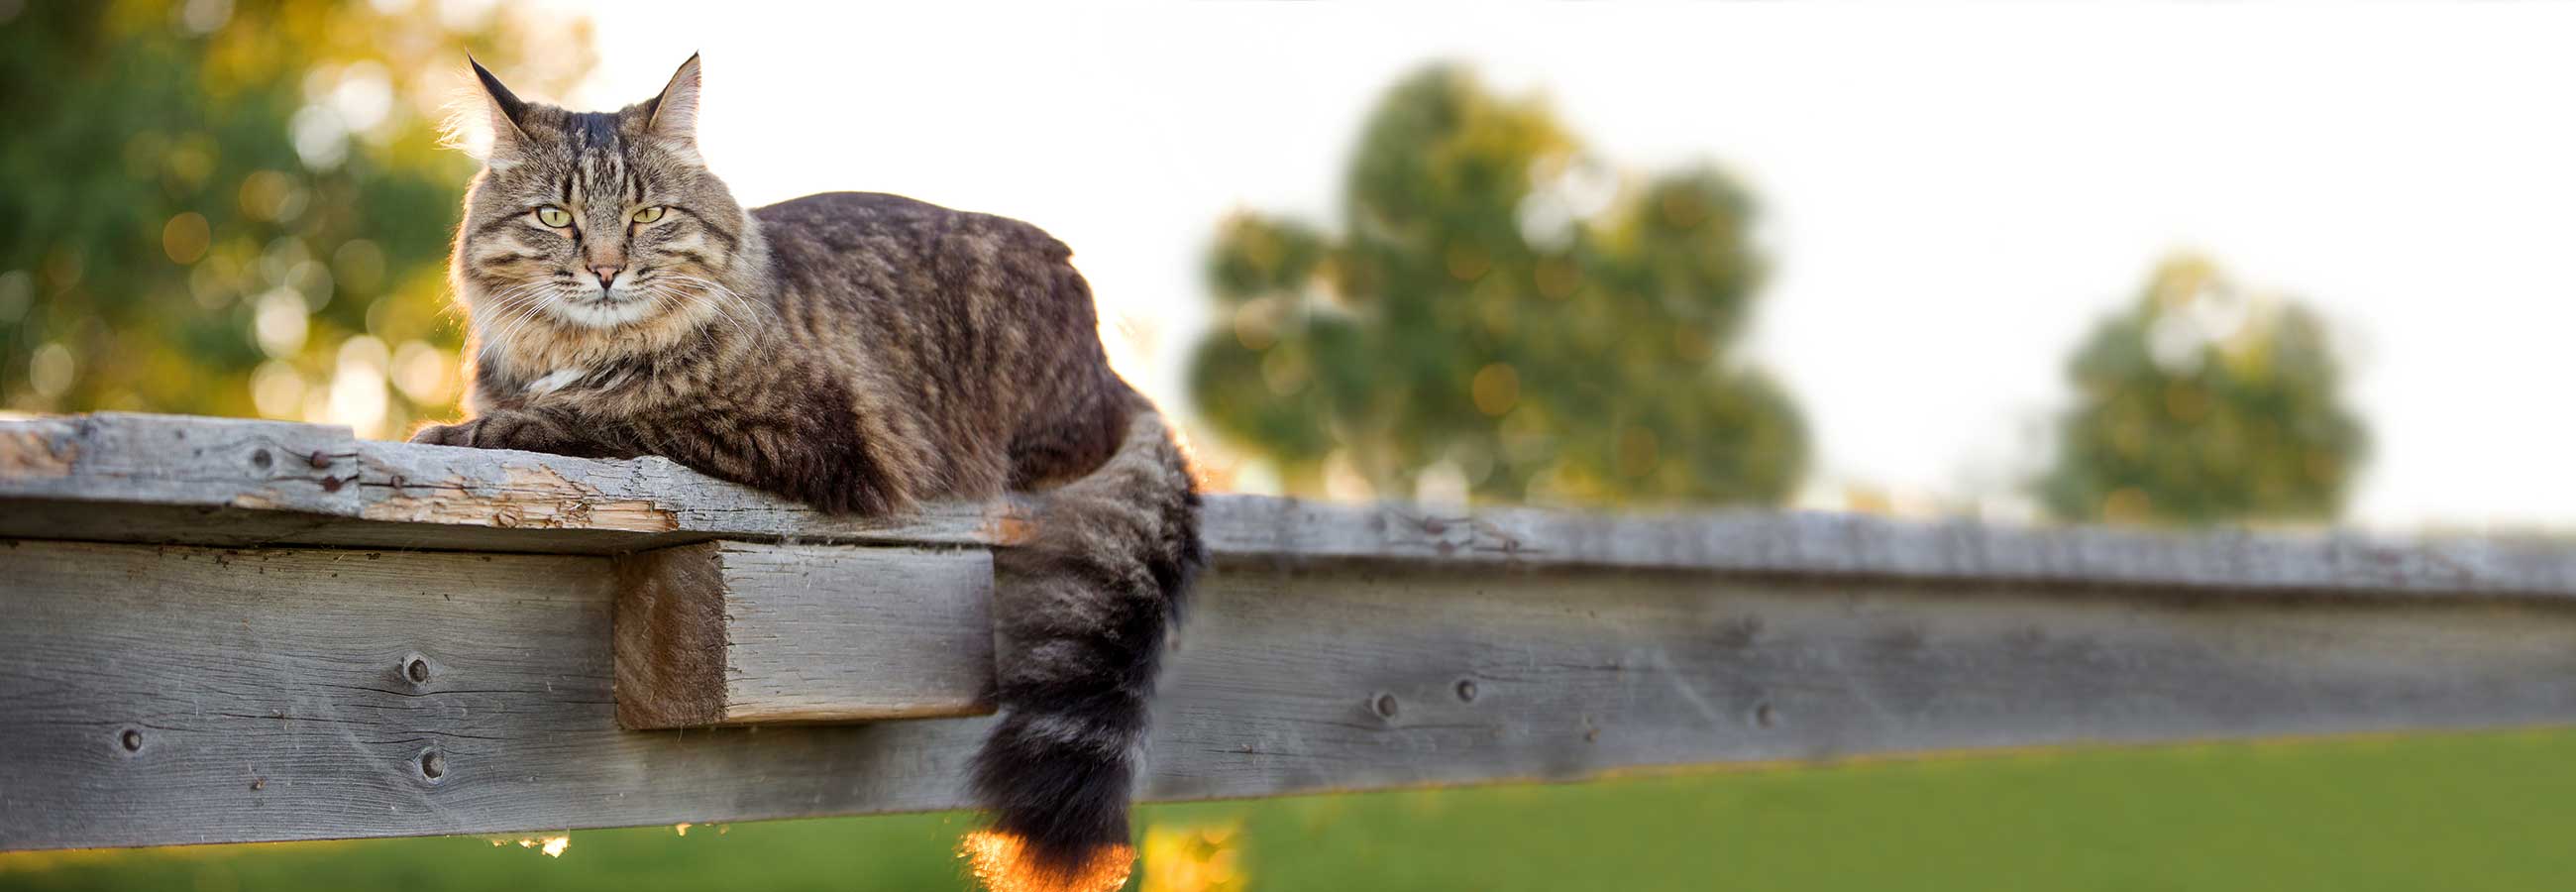 Fuzzy grey cat laying on wooden post